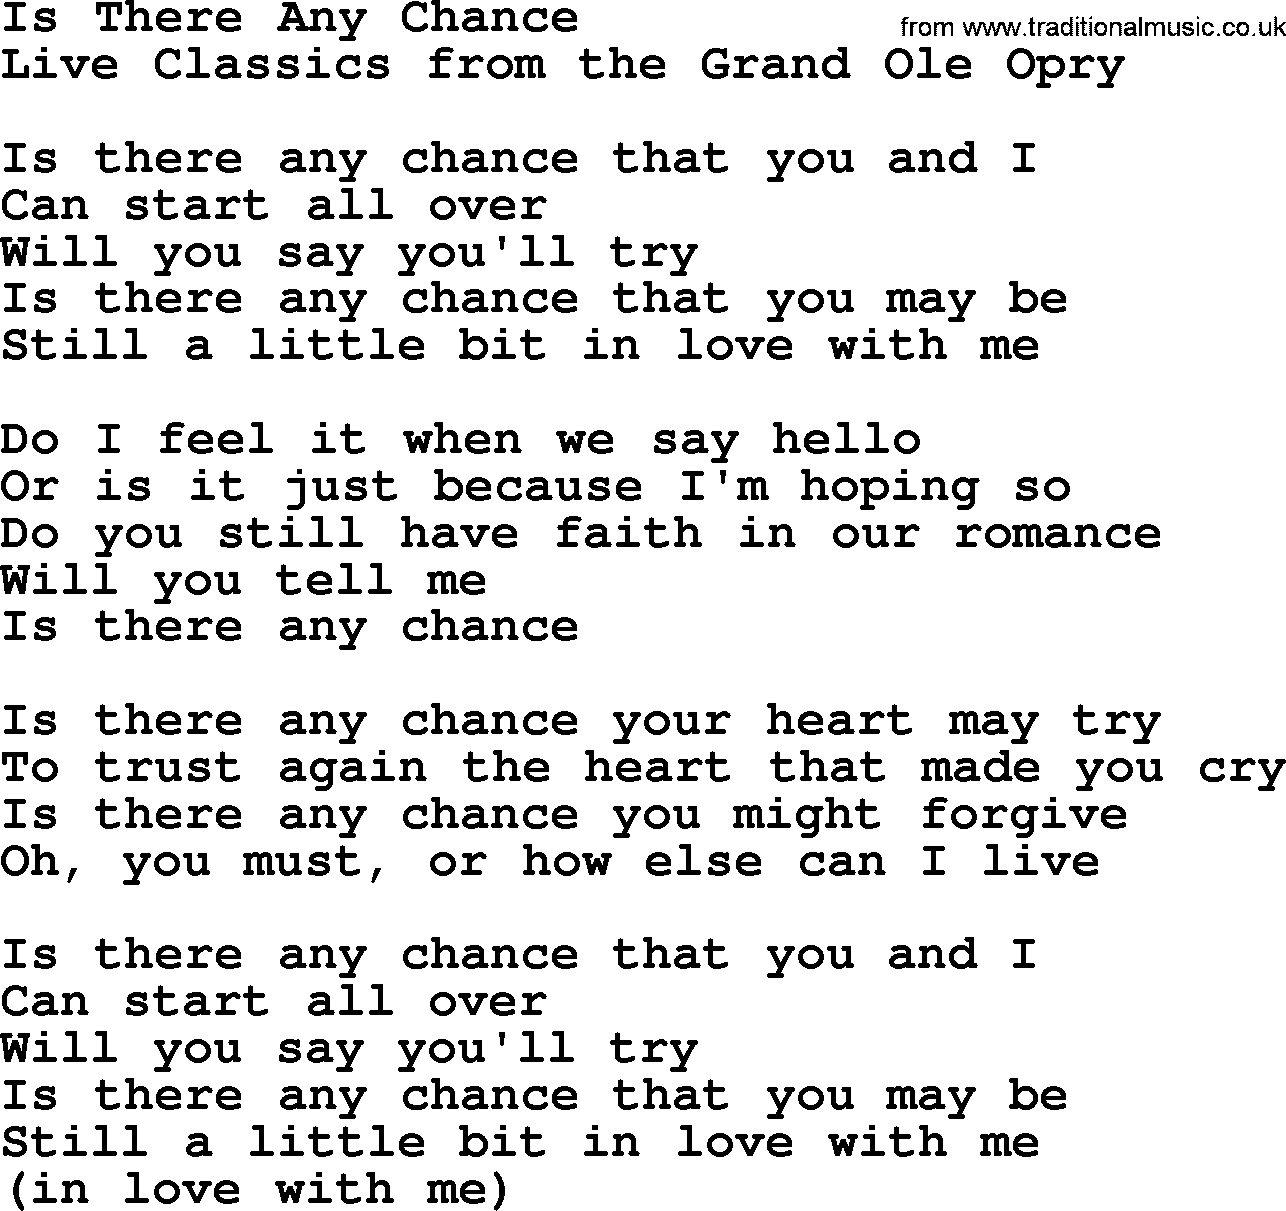 Marty Robbins song: Is There Any Chance, lyrics